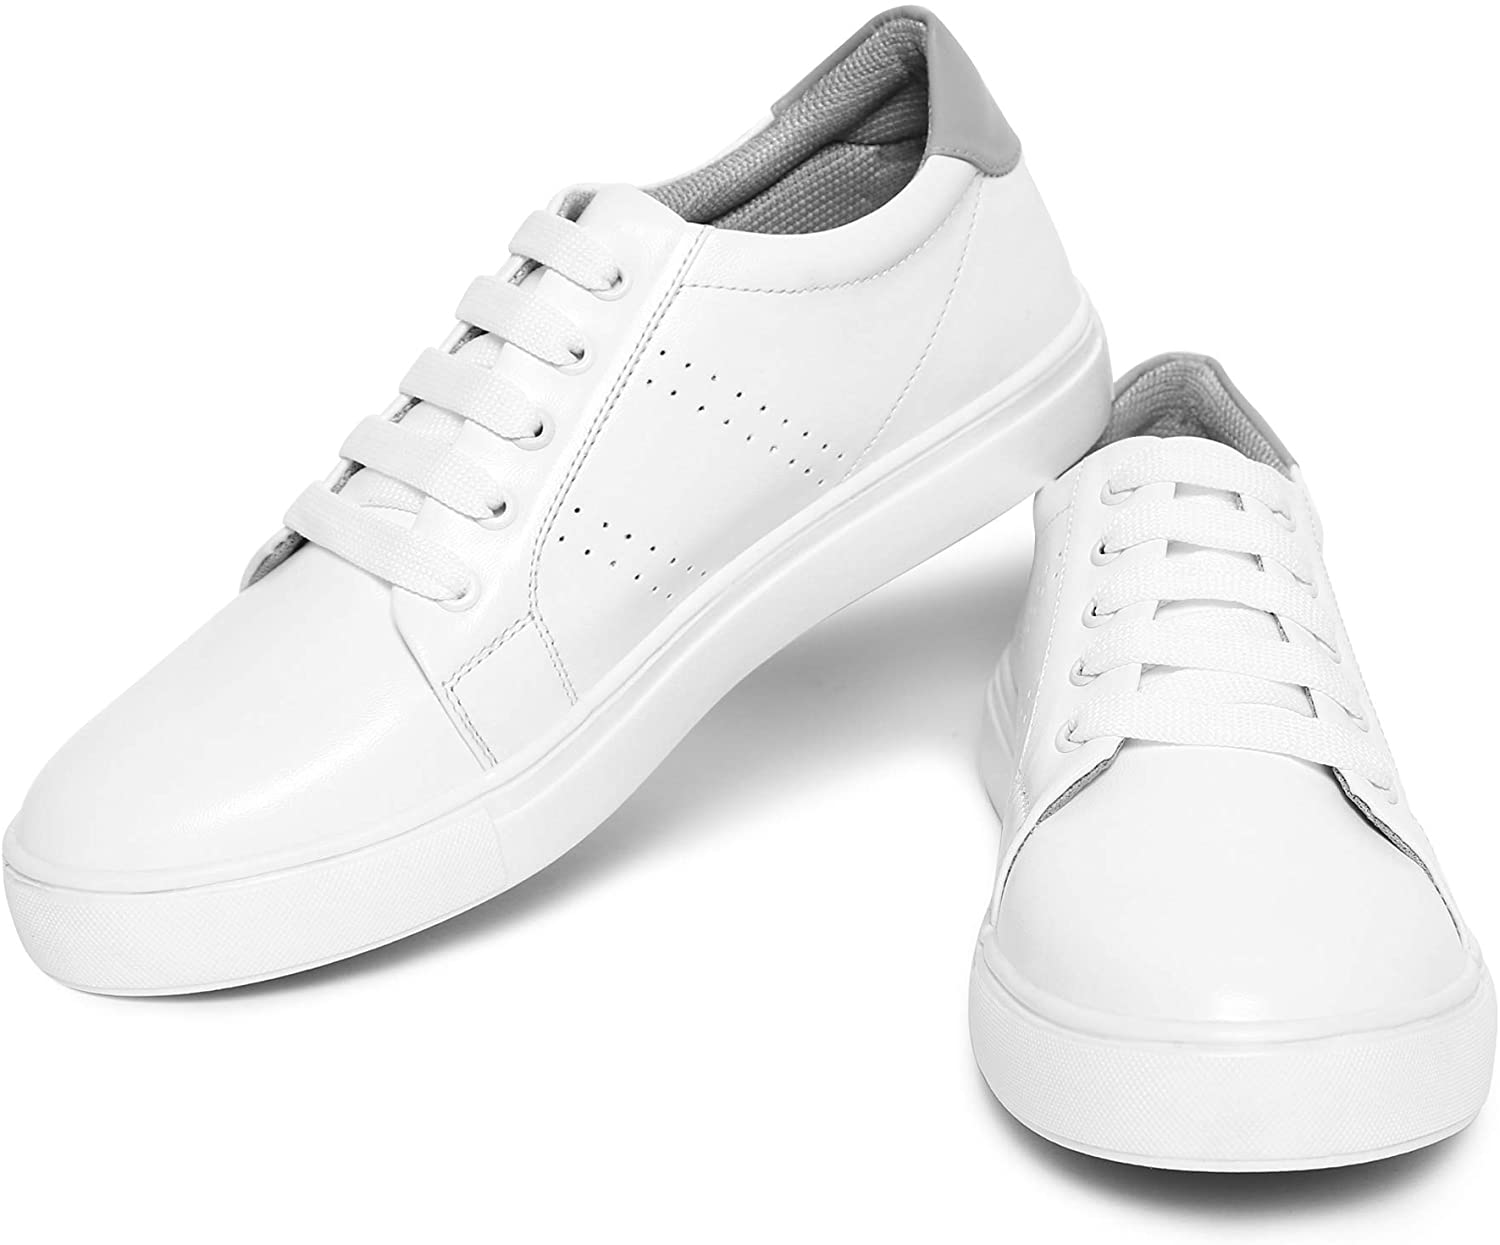 Best White Sneakers for men under budget in India | 2021